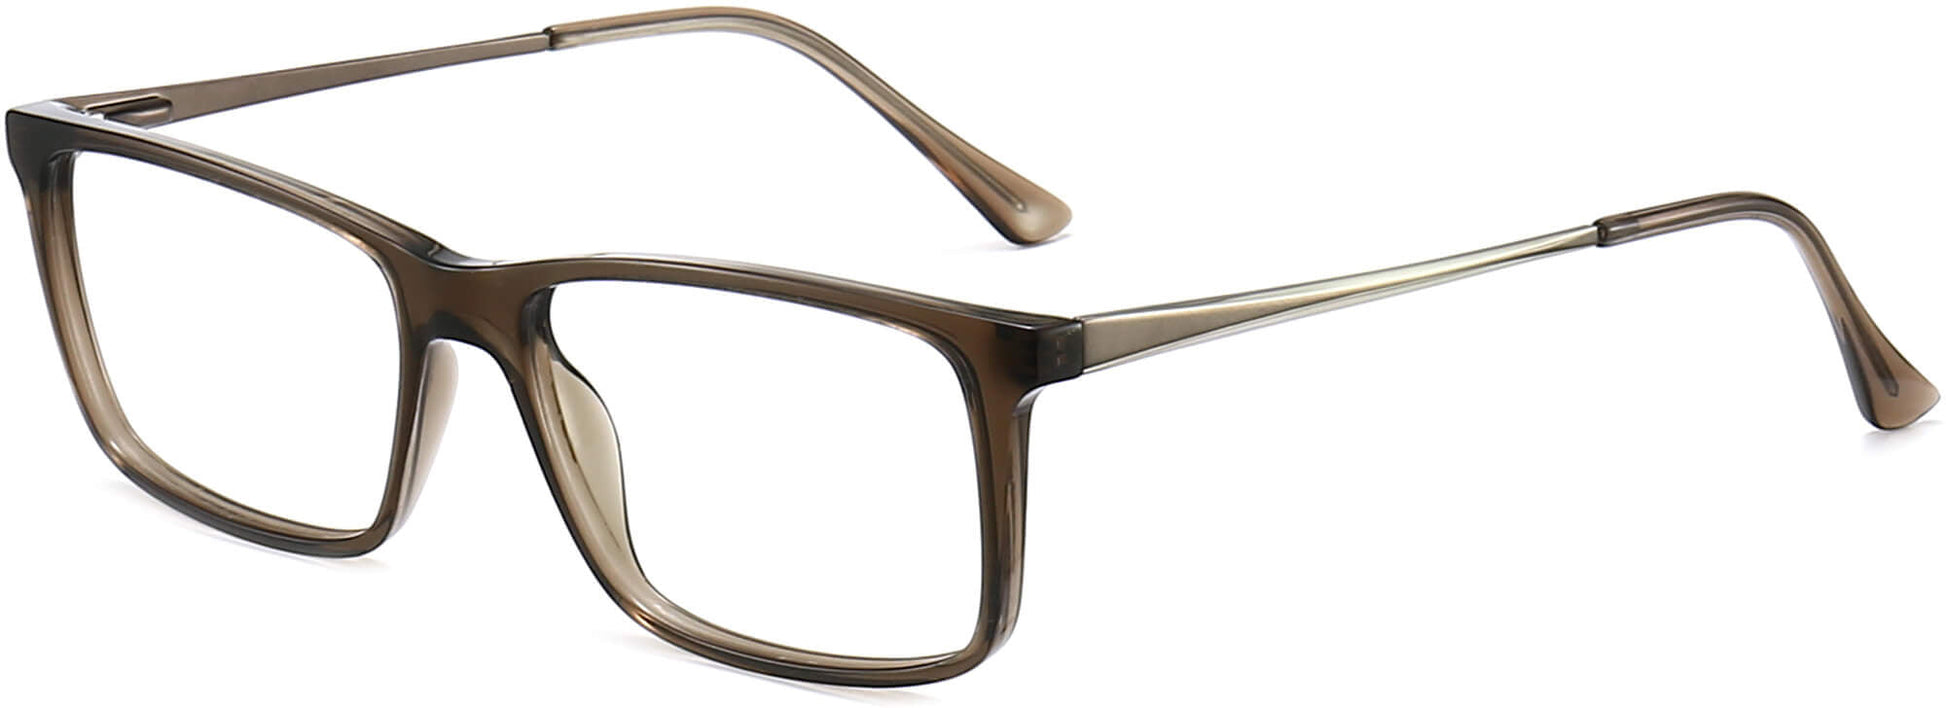 Layton Rectangle Gray Eyeglasses from ANRRI, angle view